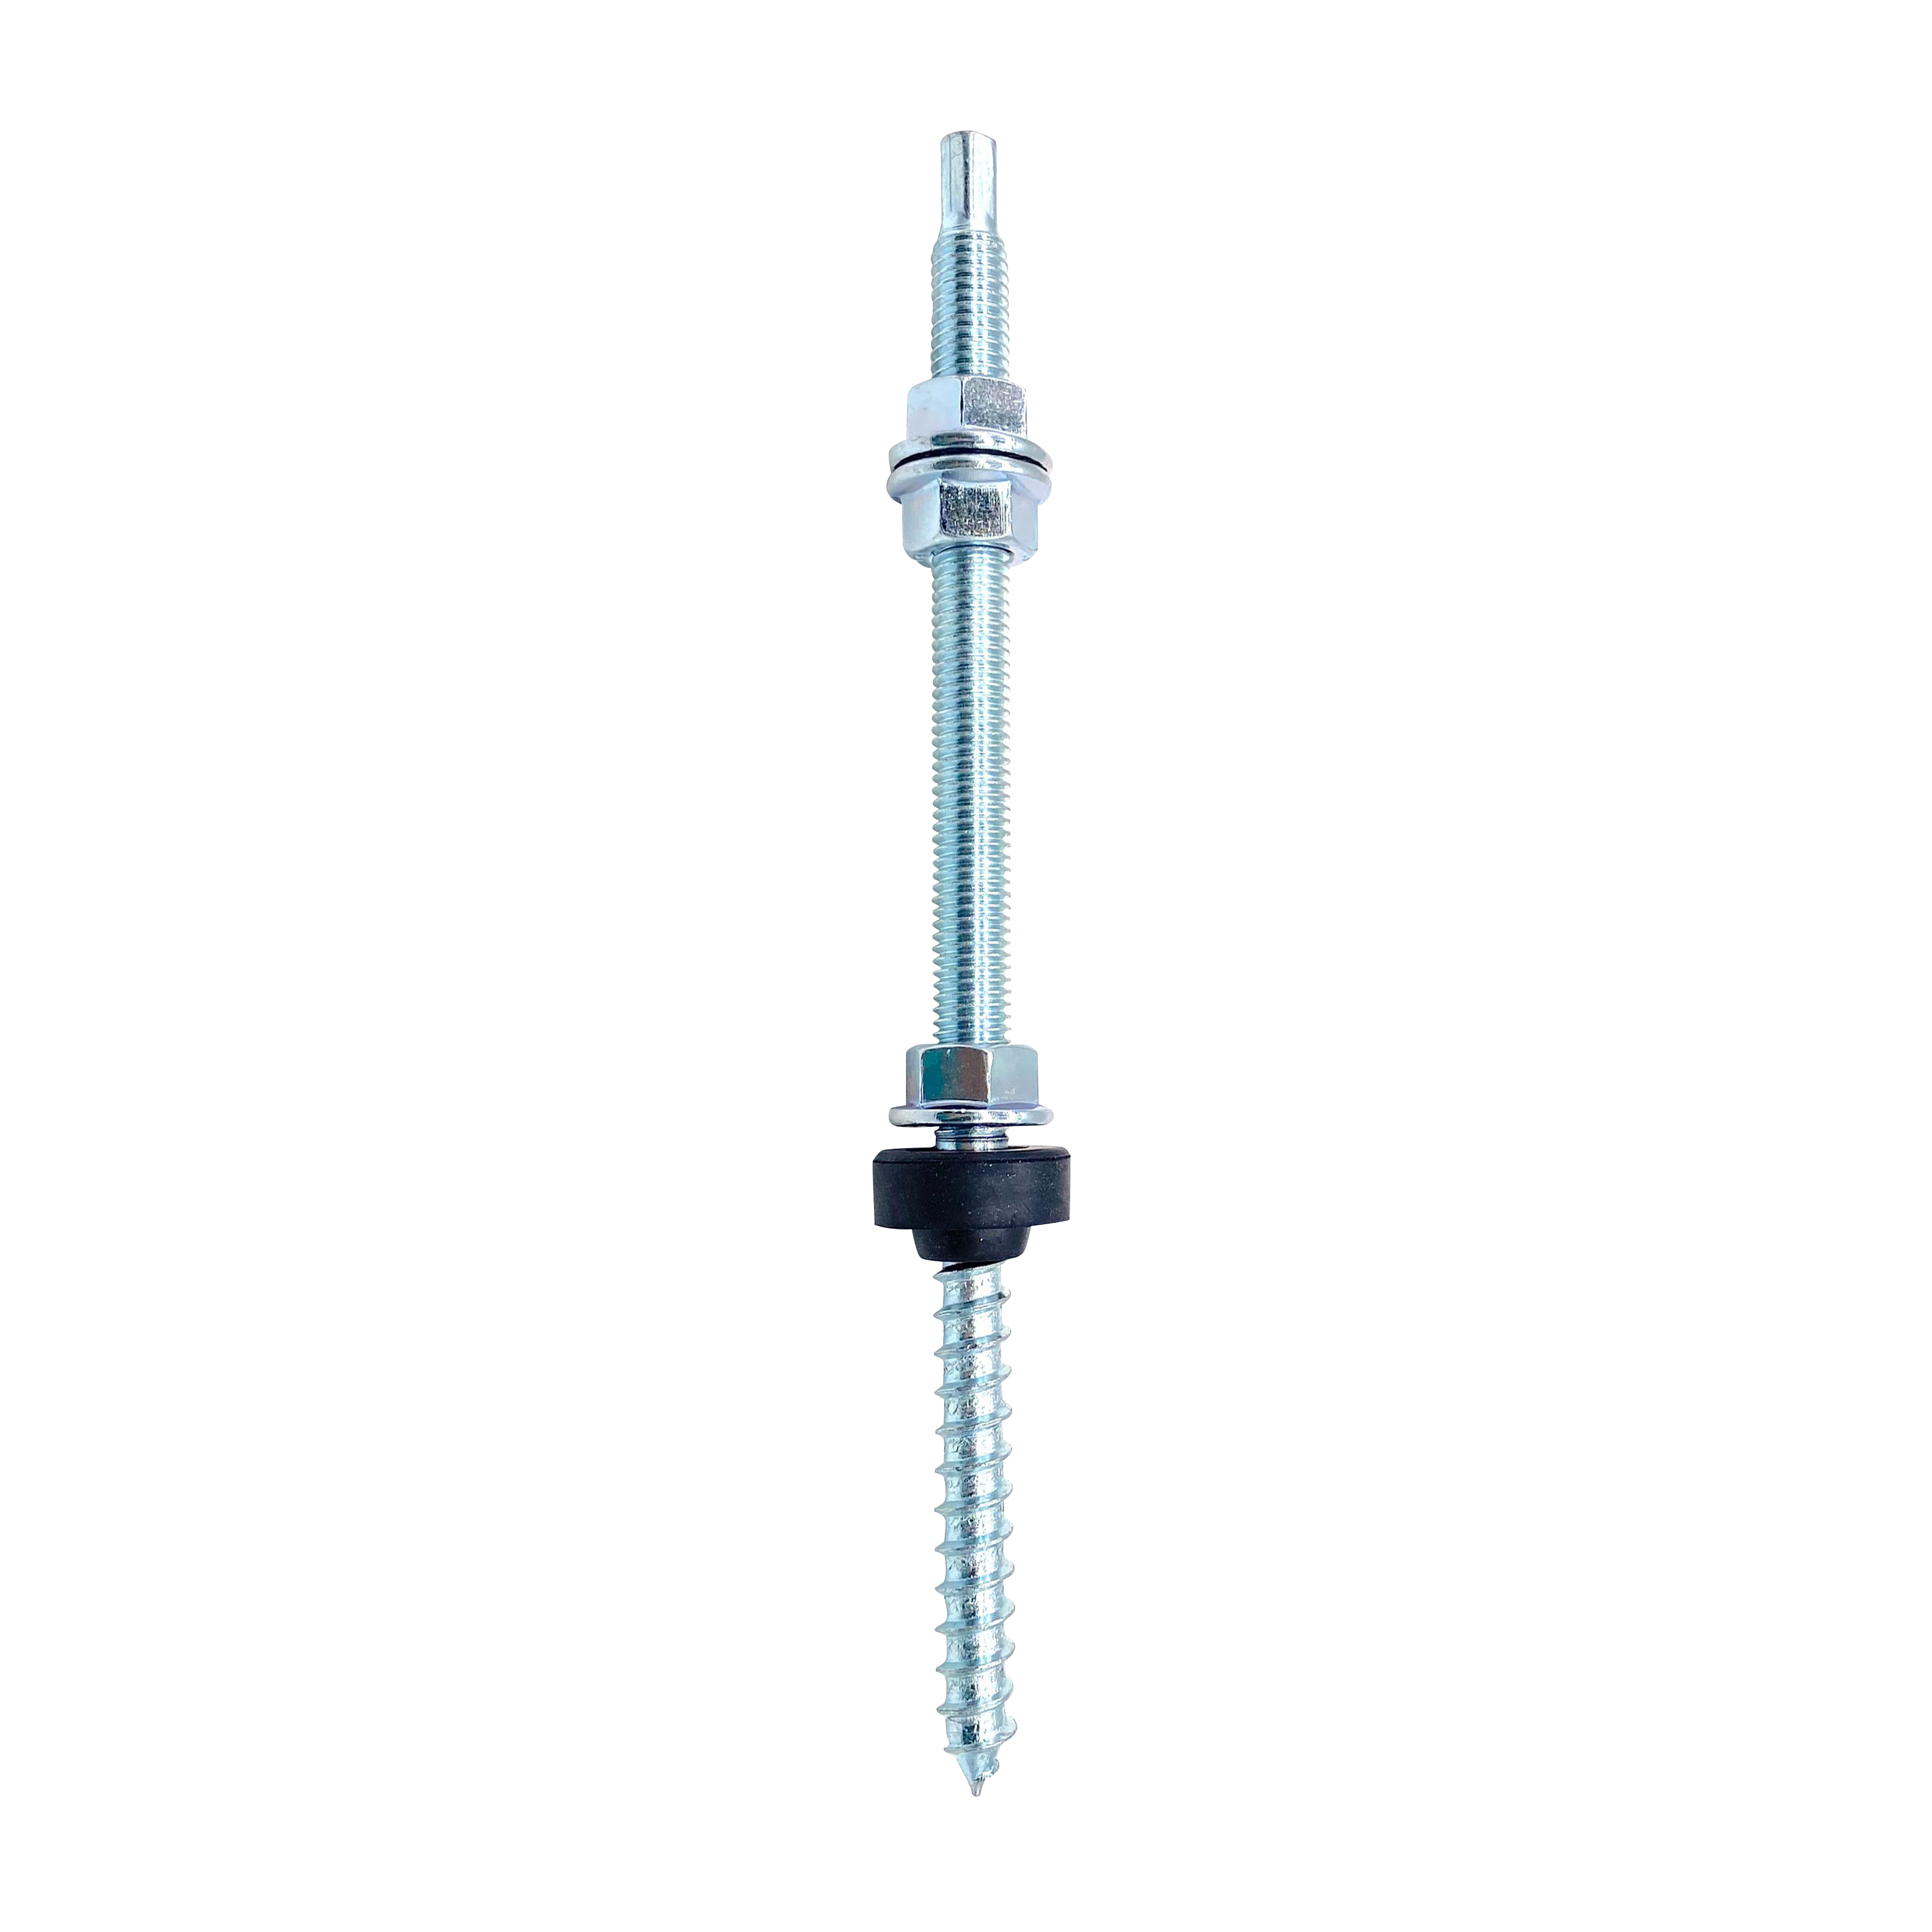 Rubicon Dowel screw for roof installations, wood, 200mm